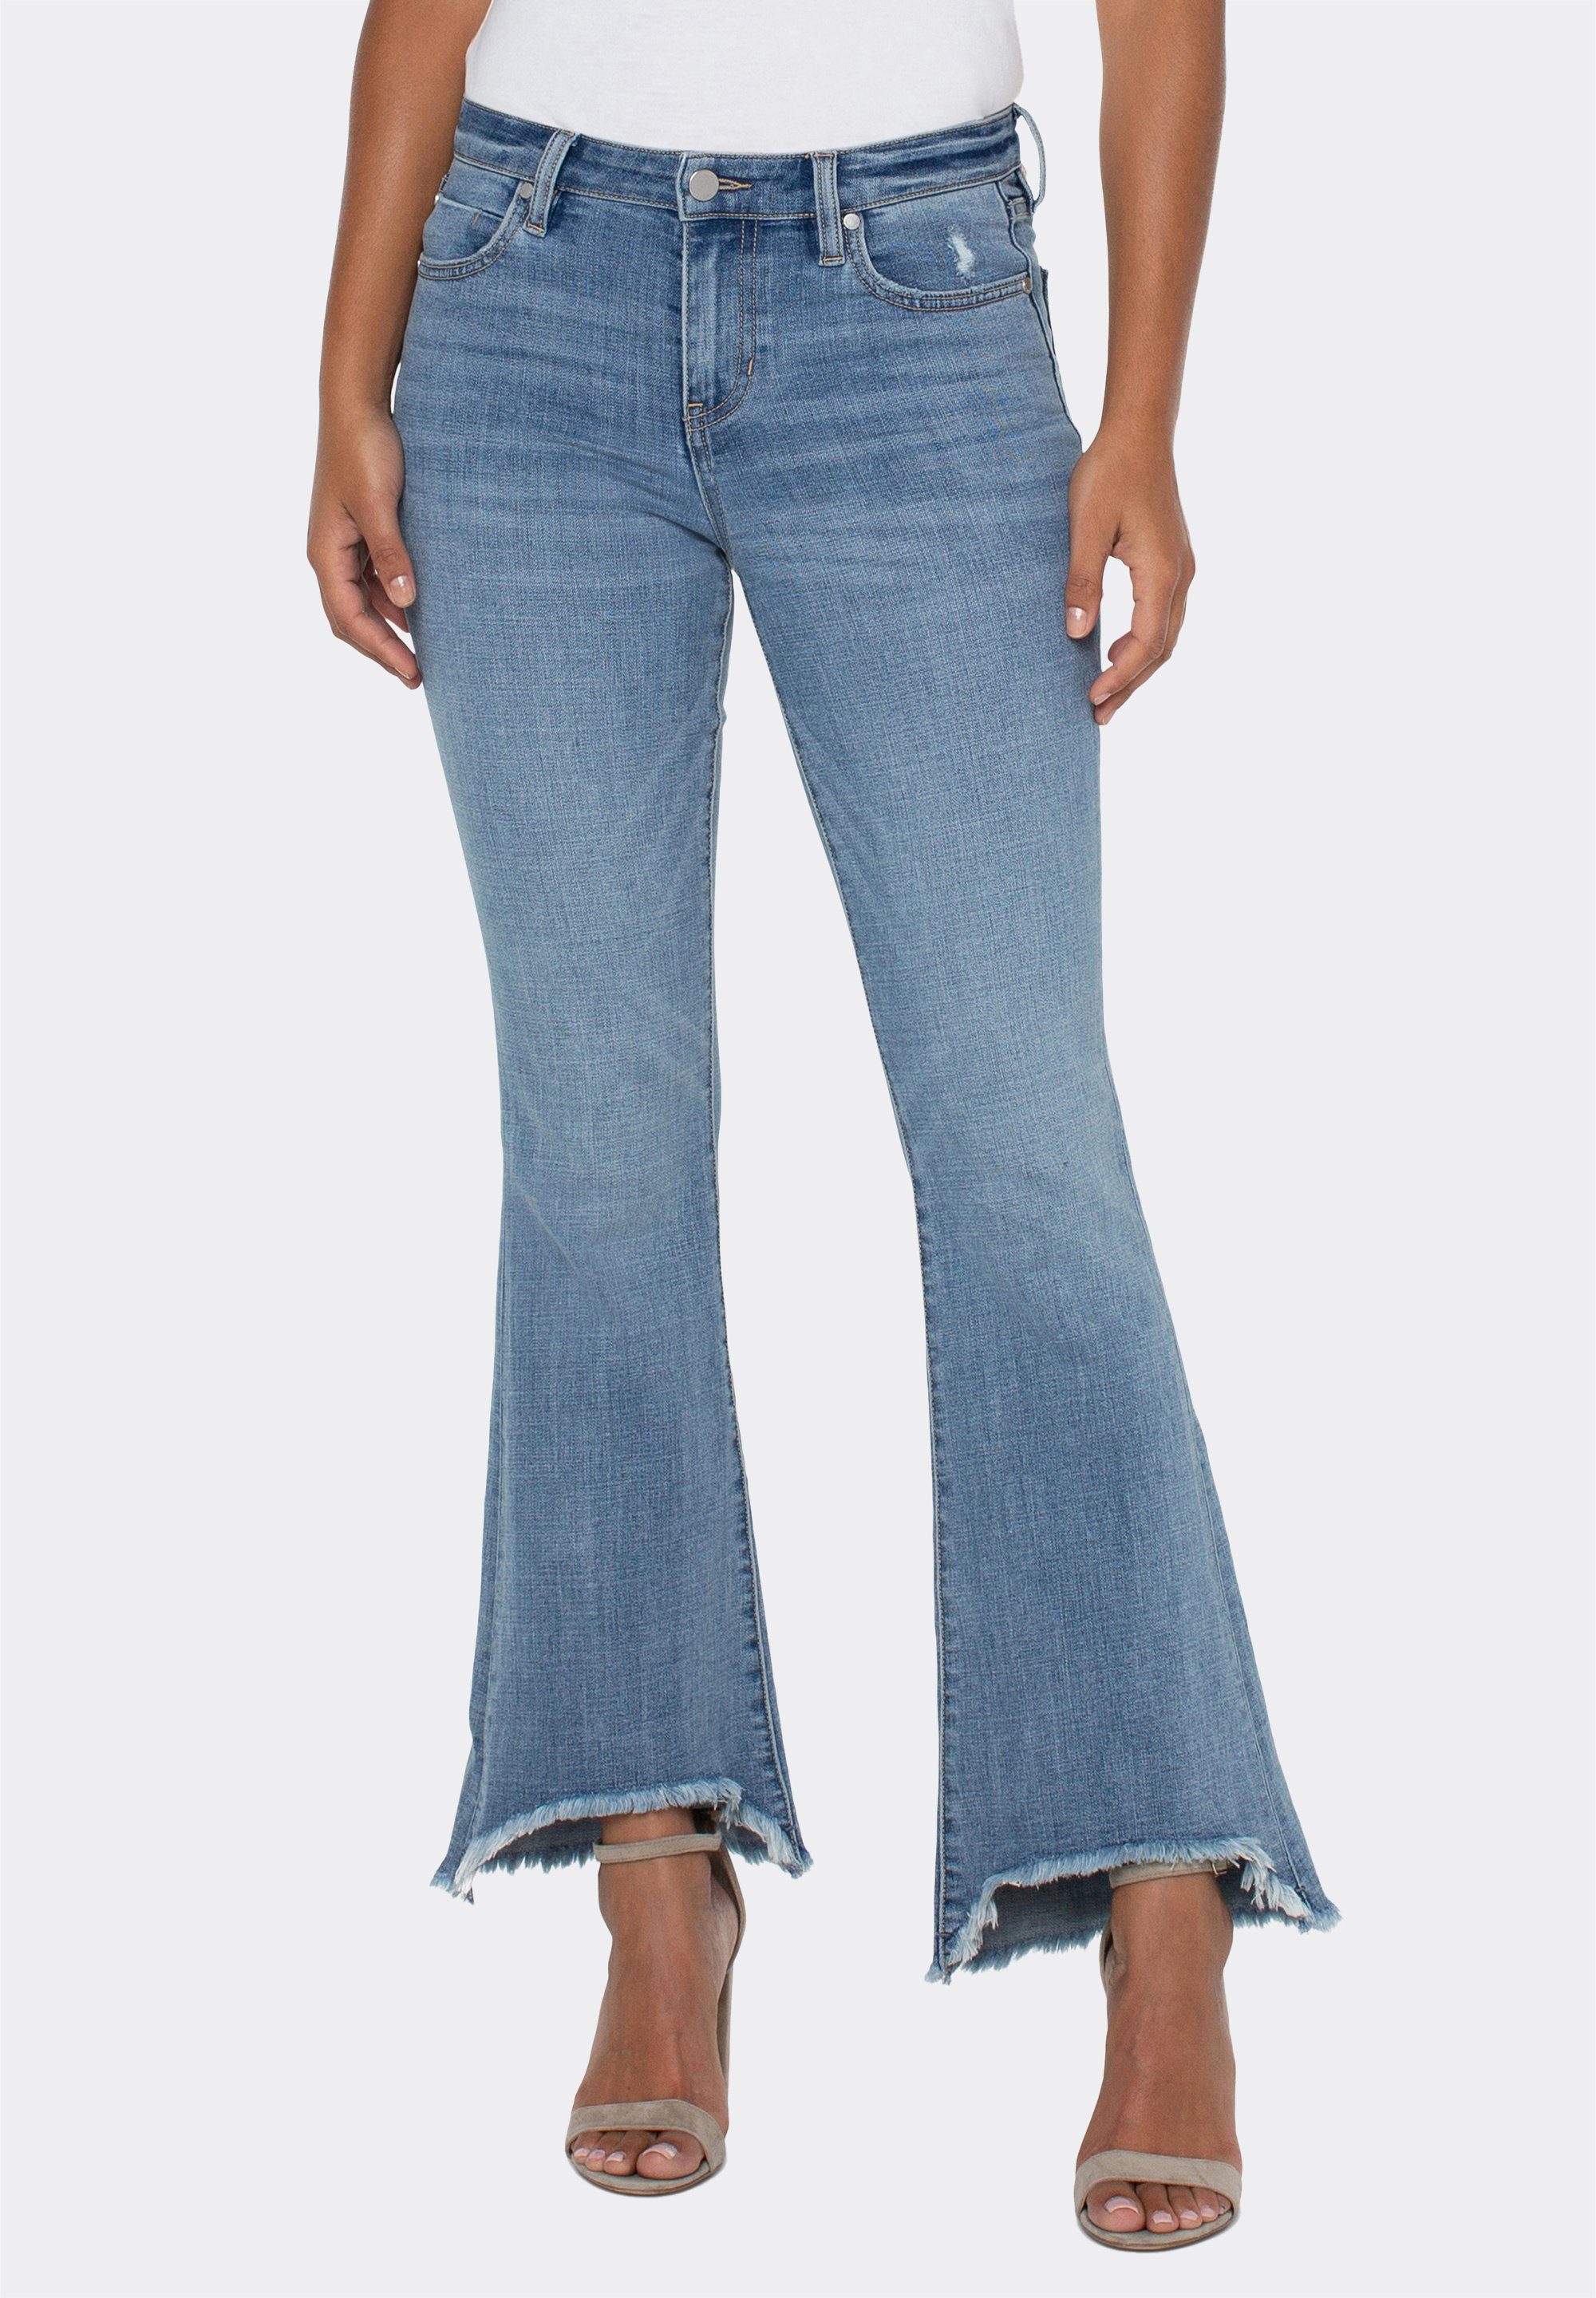 Liverpool Bootcut-Jeans komfortabel Flare Stretchy und Hannah